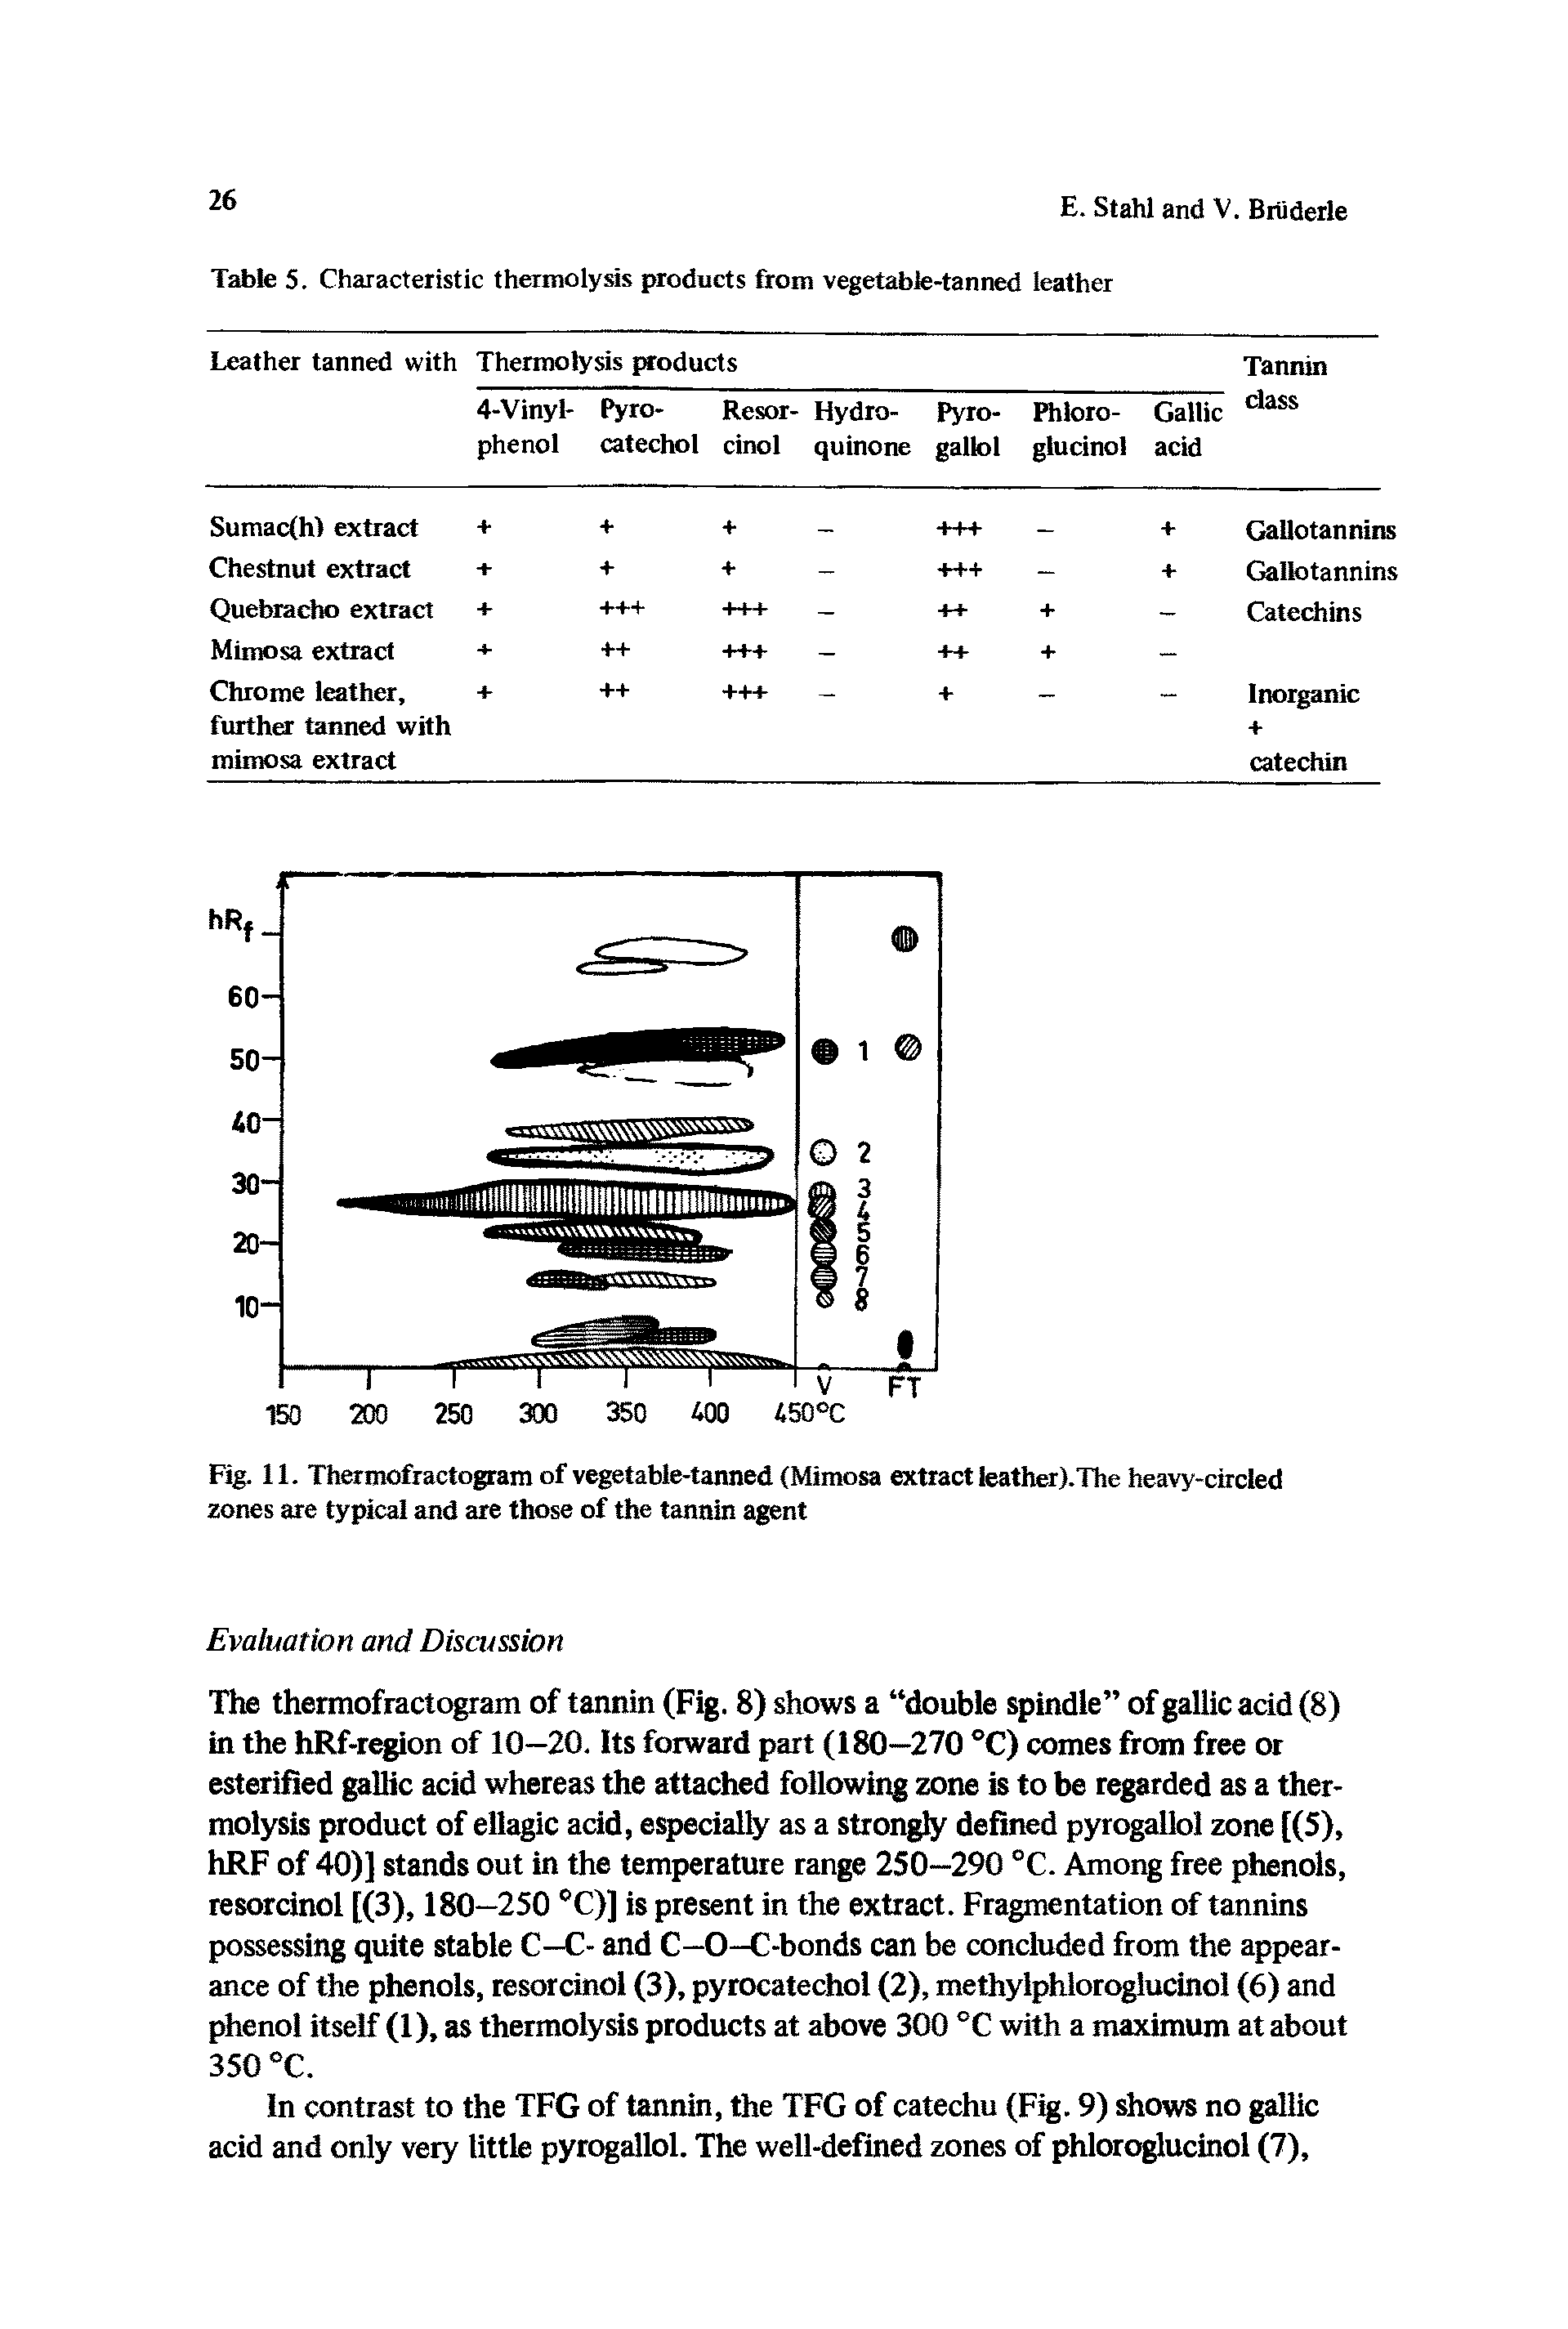 Fig. 11. Thermofractogtam of vegetable-tanned (Mimosa extract ieather).The heavy-circled zones are typical and are those of the tannin agent...